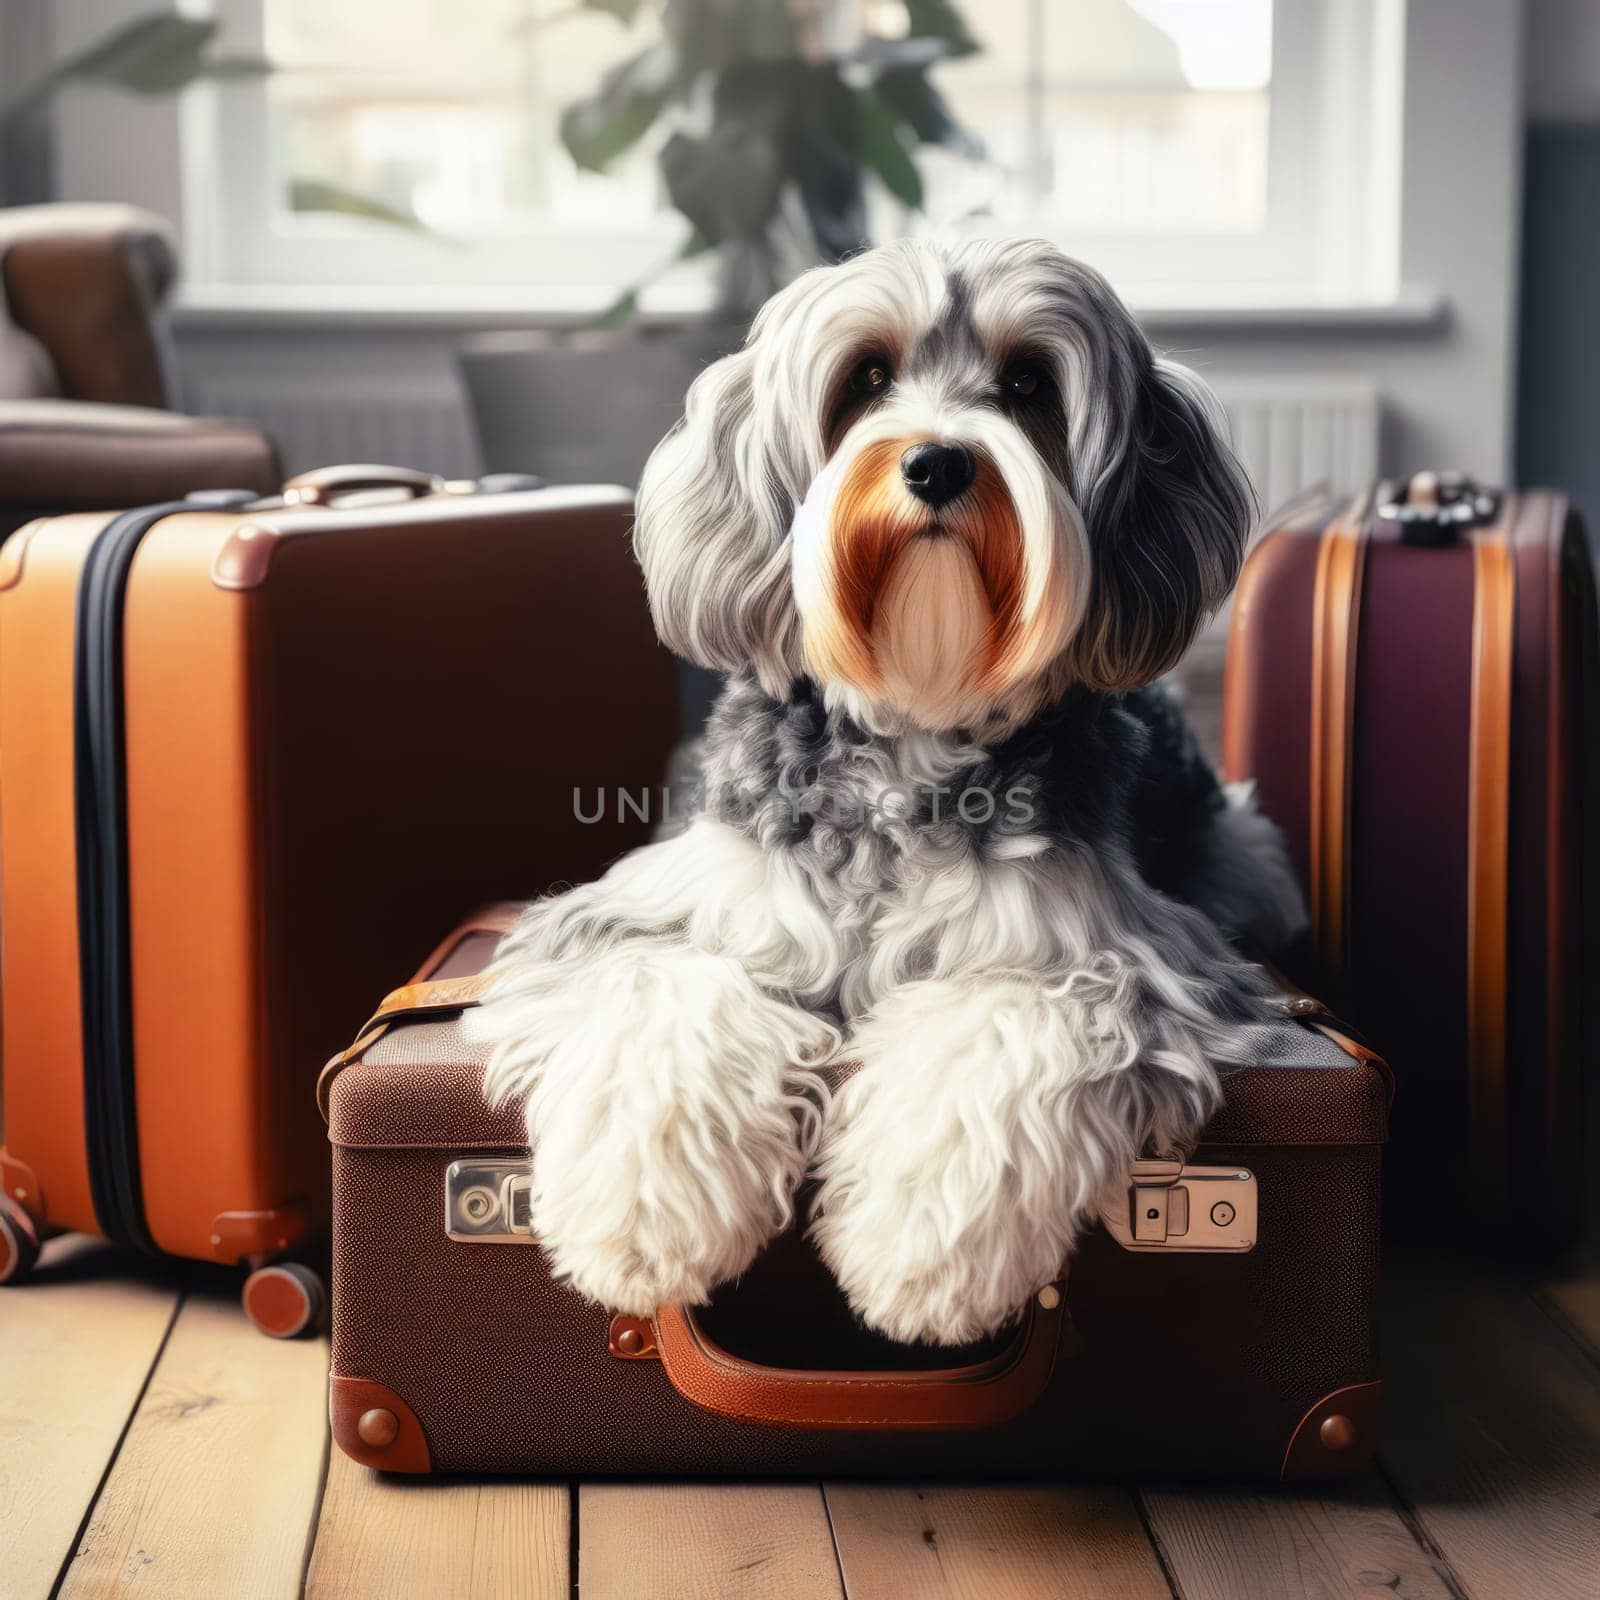 Adorable dog sitting on a suitcase, ready for travel, evoking a sense of adventure and companionship. by sfinks